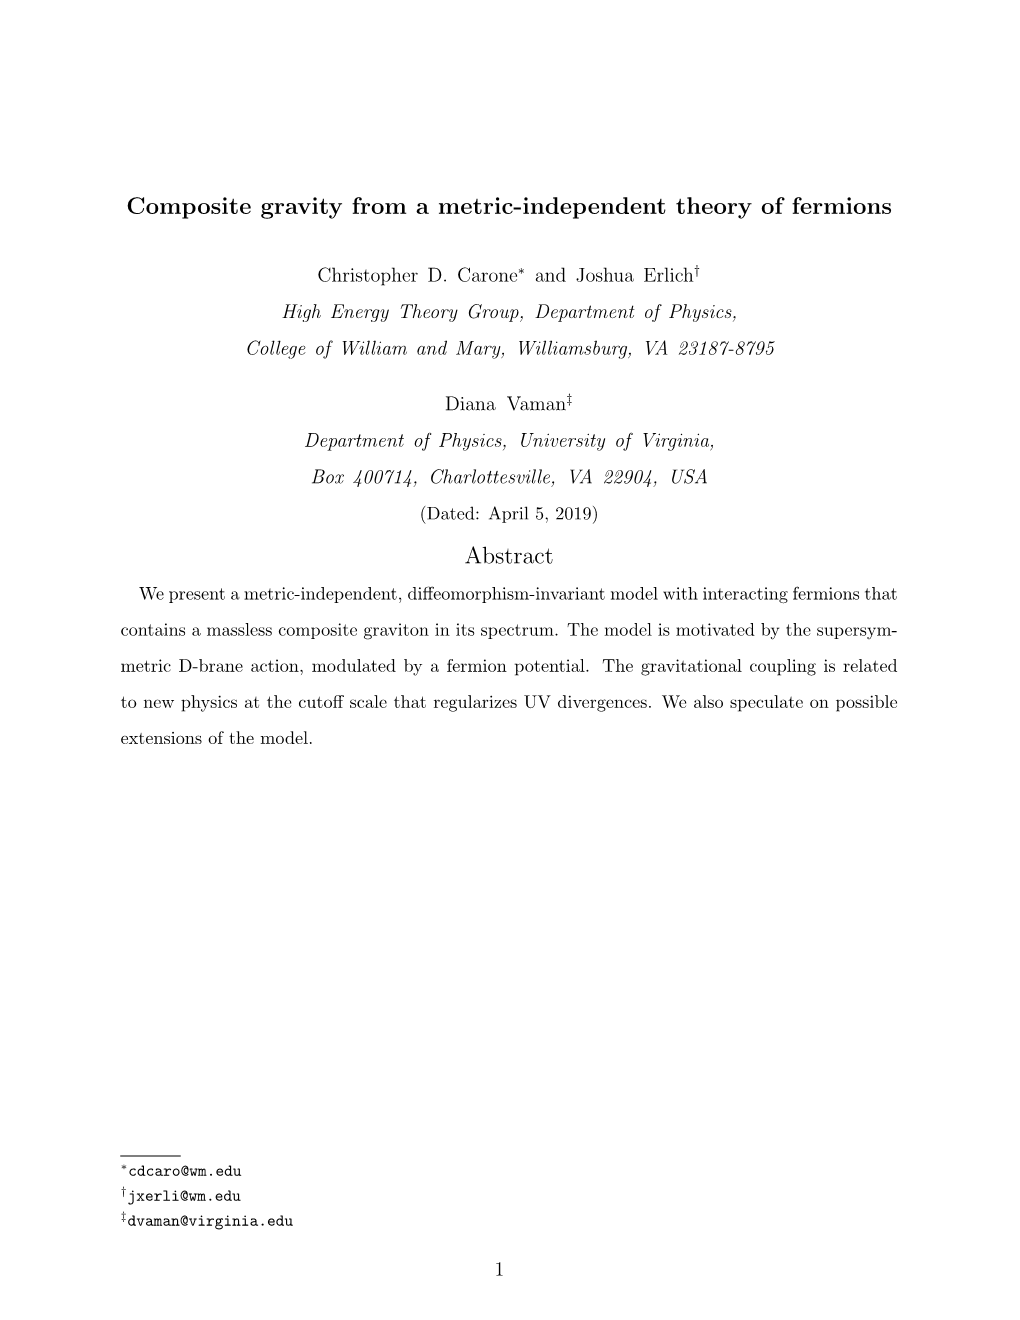 Composite Gravity from a Metric-Independent Theory of Fermions